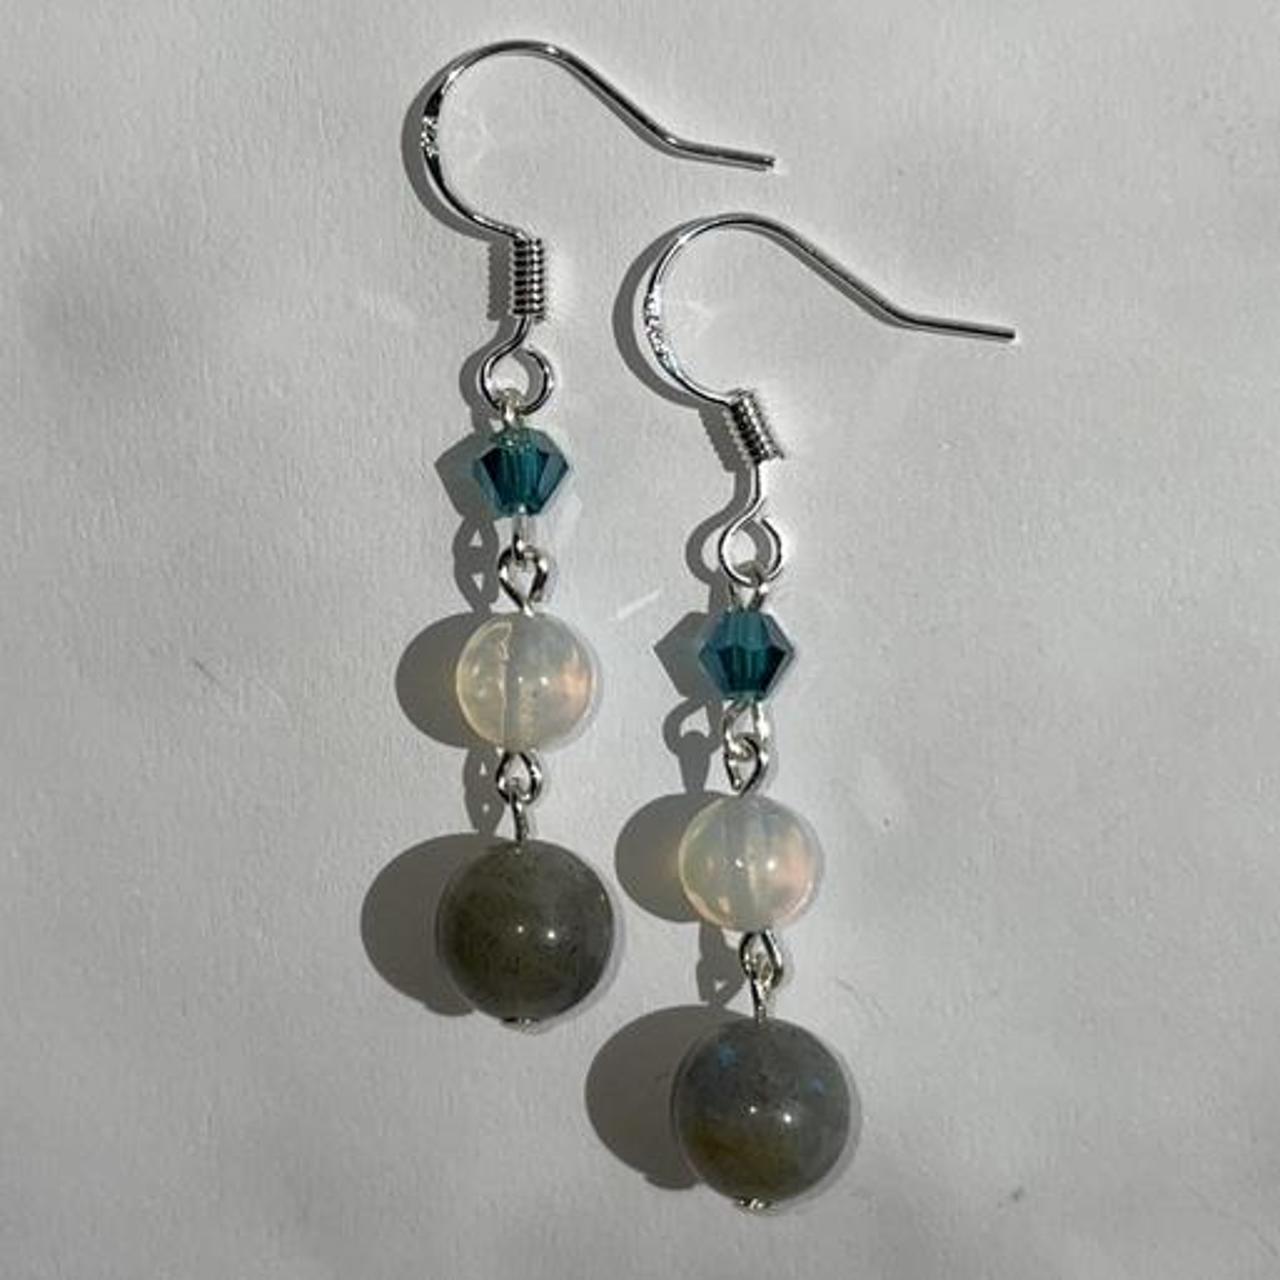 Product Image 4 - Handmade silver wire earrings!

Handmade silver